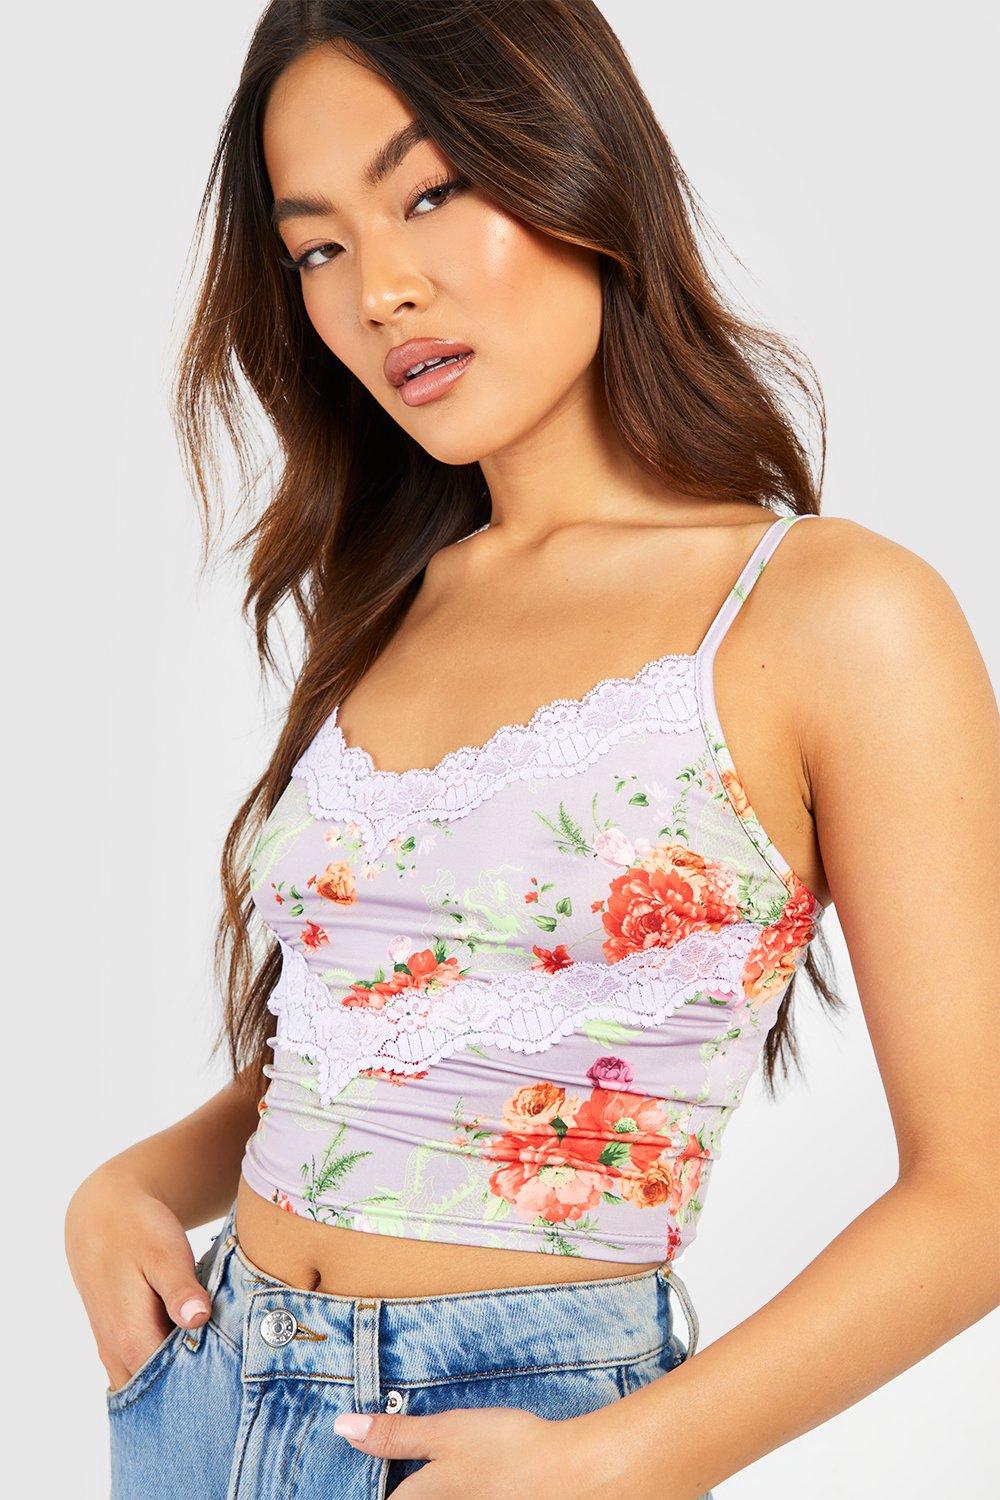 Lady Pink Lace Cami Top – Pretty for Girls